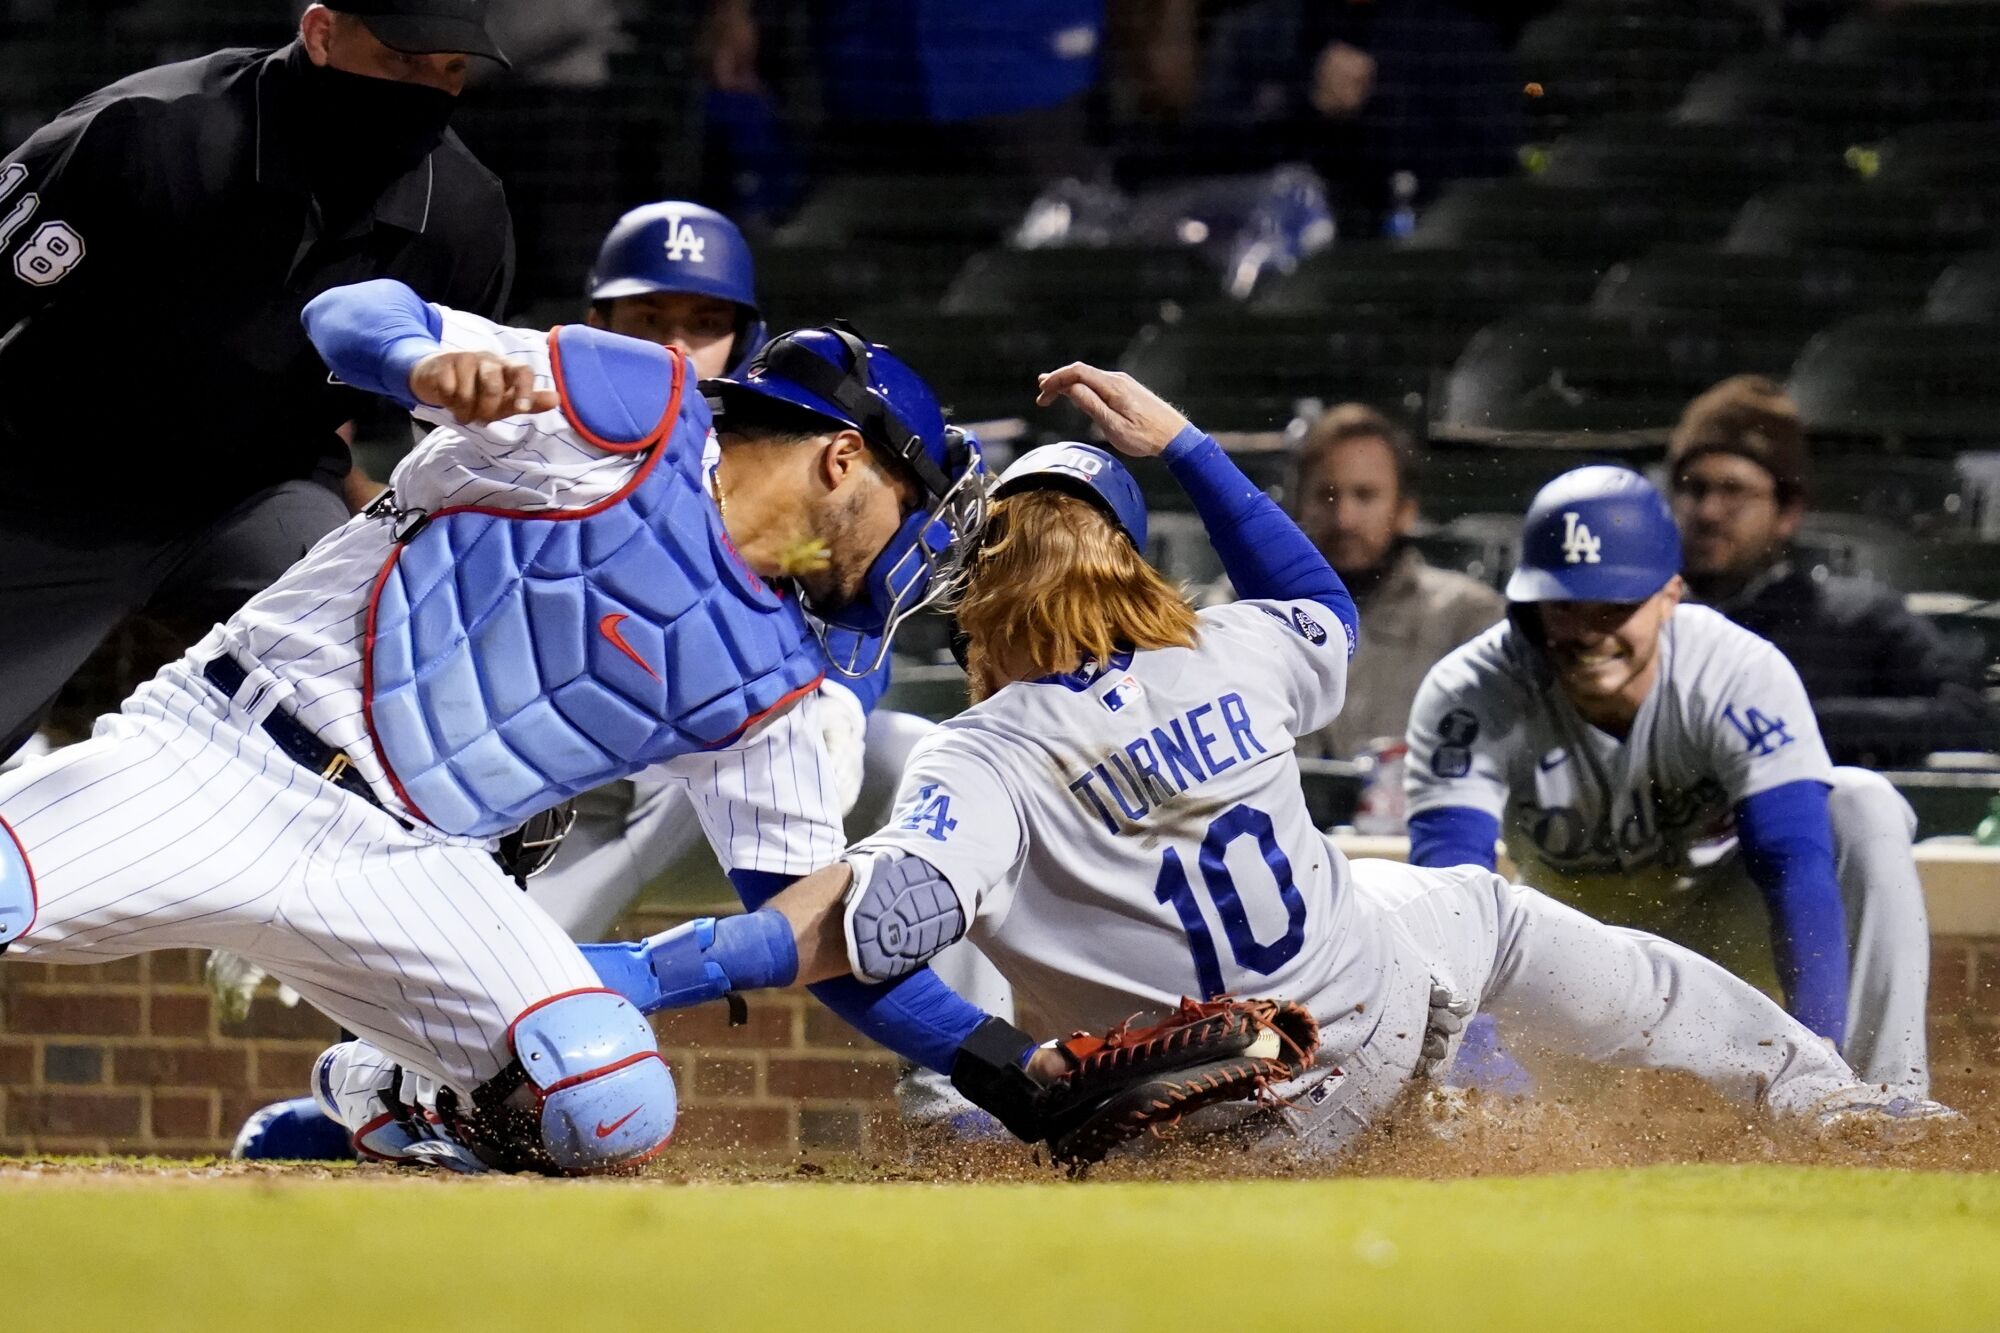 Cubs catcher Willson Contreras tags out Justin Turner in the 10th inning.